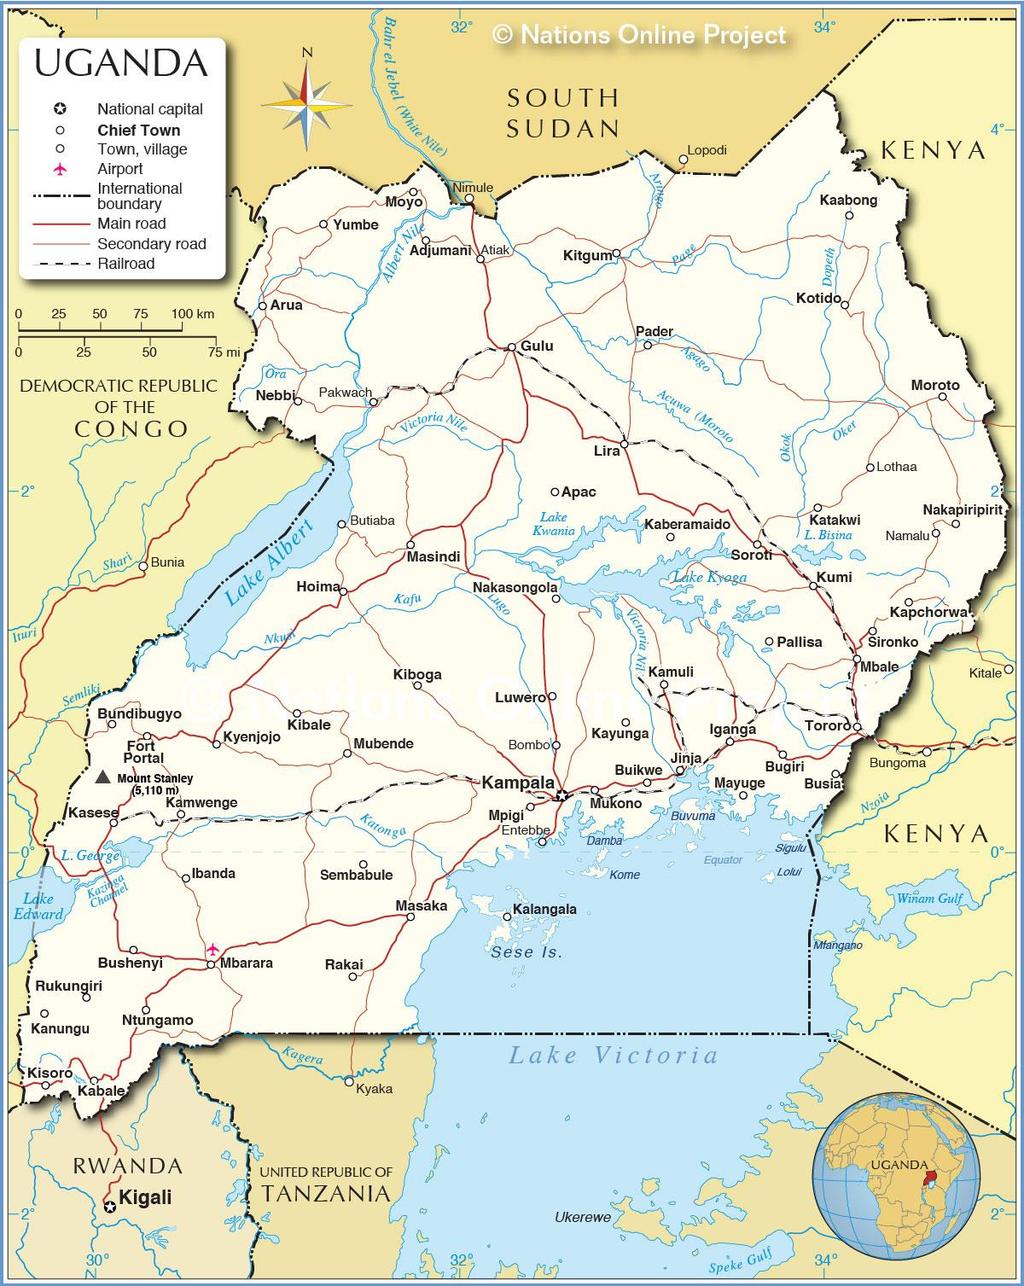 (C) MAP OF UGANDA 11 11 This map is intended exclusively for the use of the readers of the report to which it is attached.